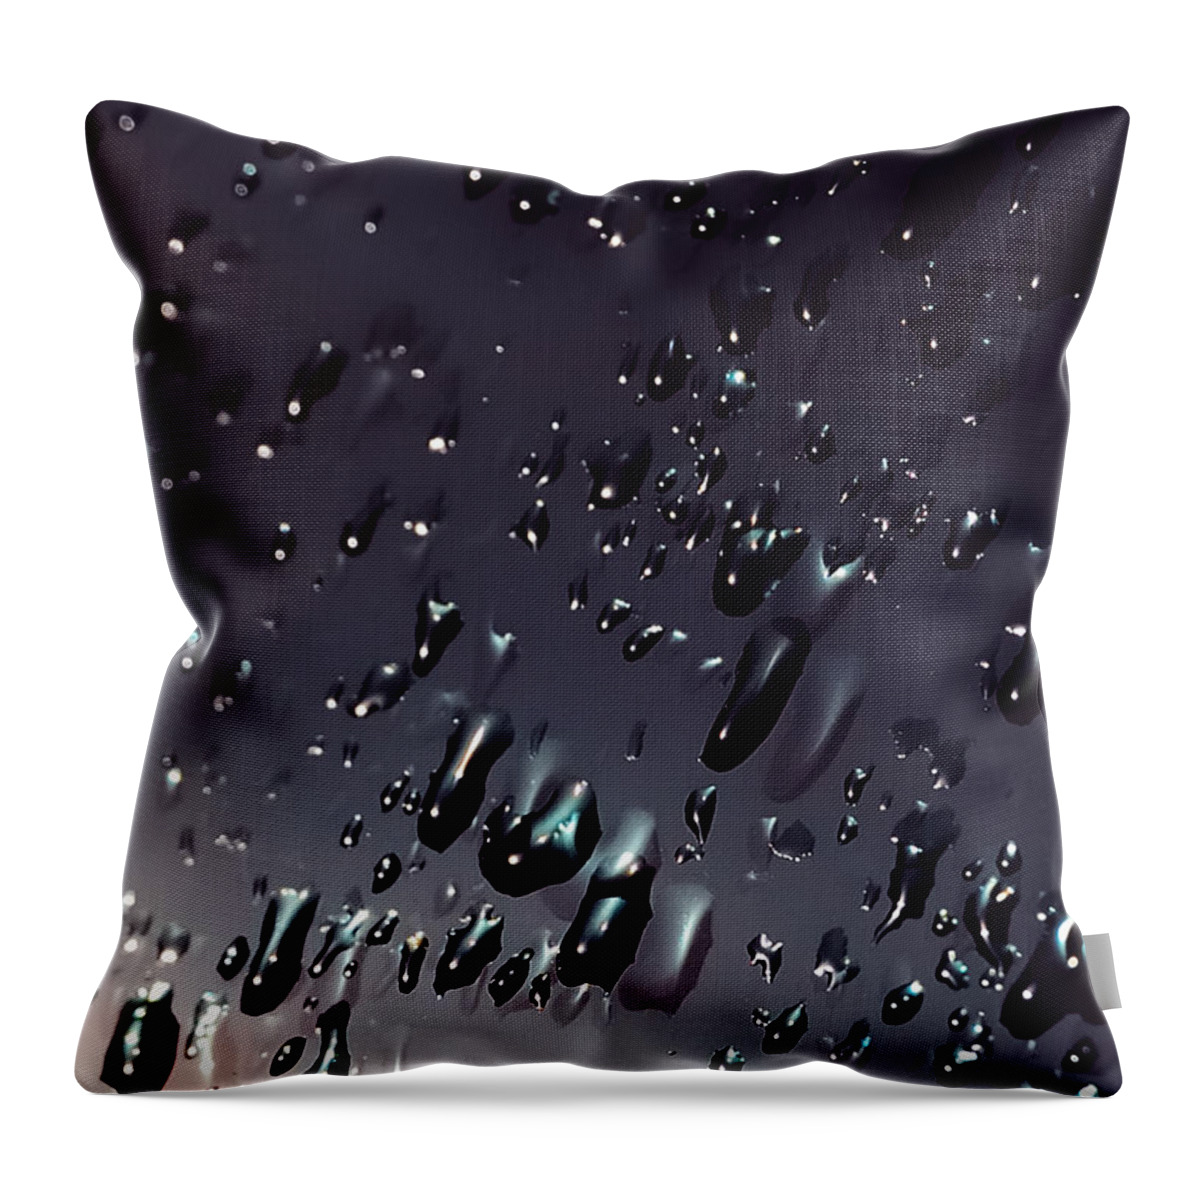 Abstracts Throw Pillow featuring the photograph Black Rain by Steven Milner